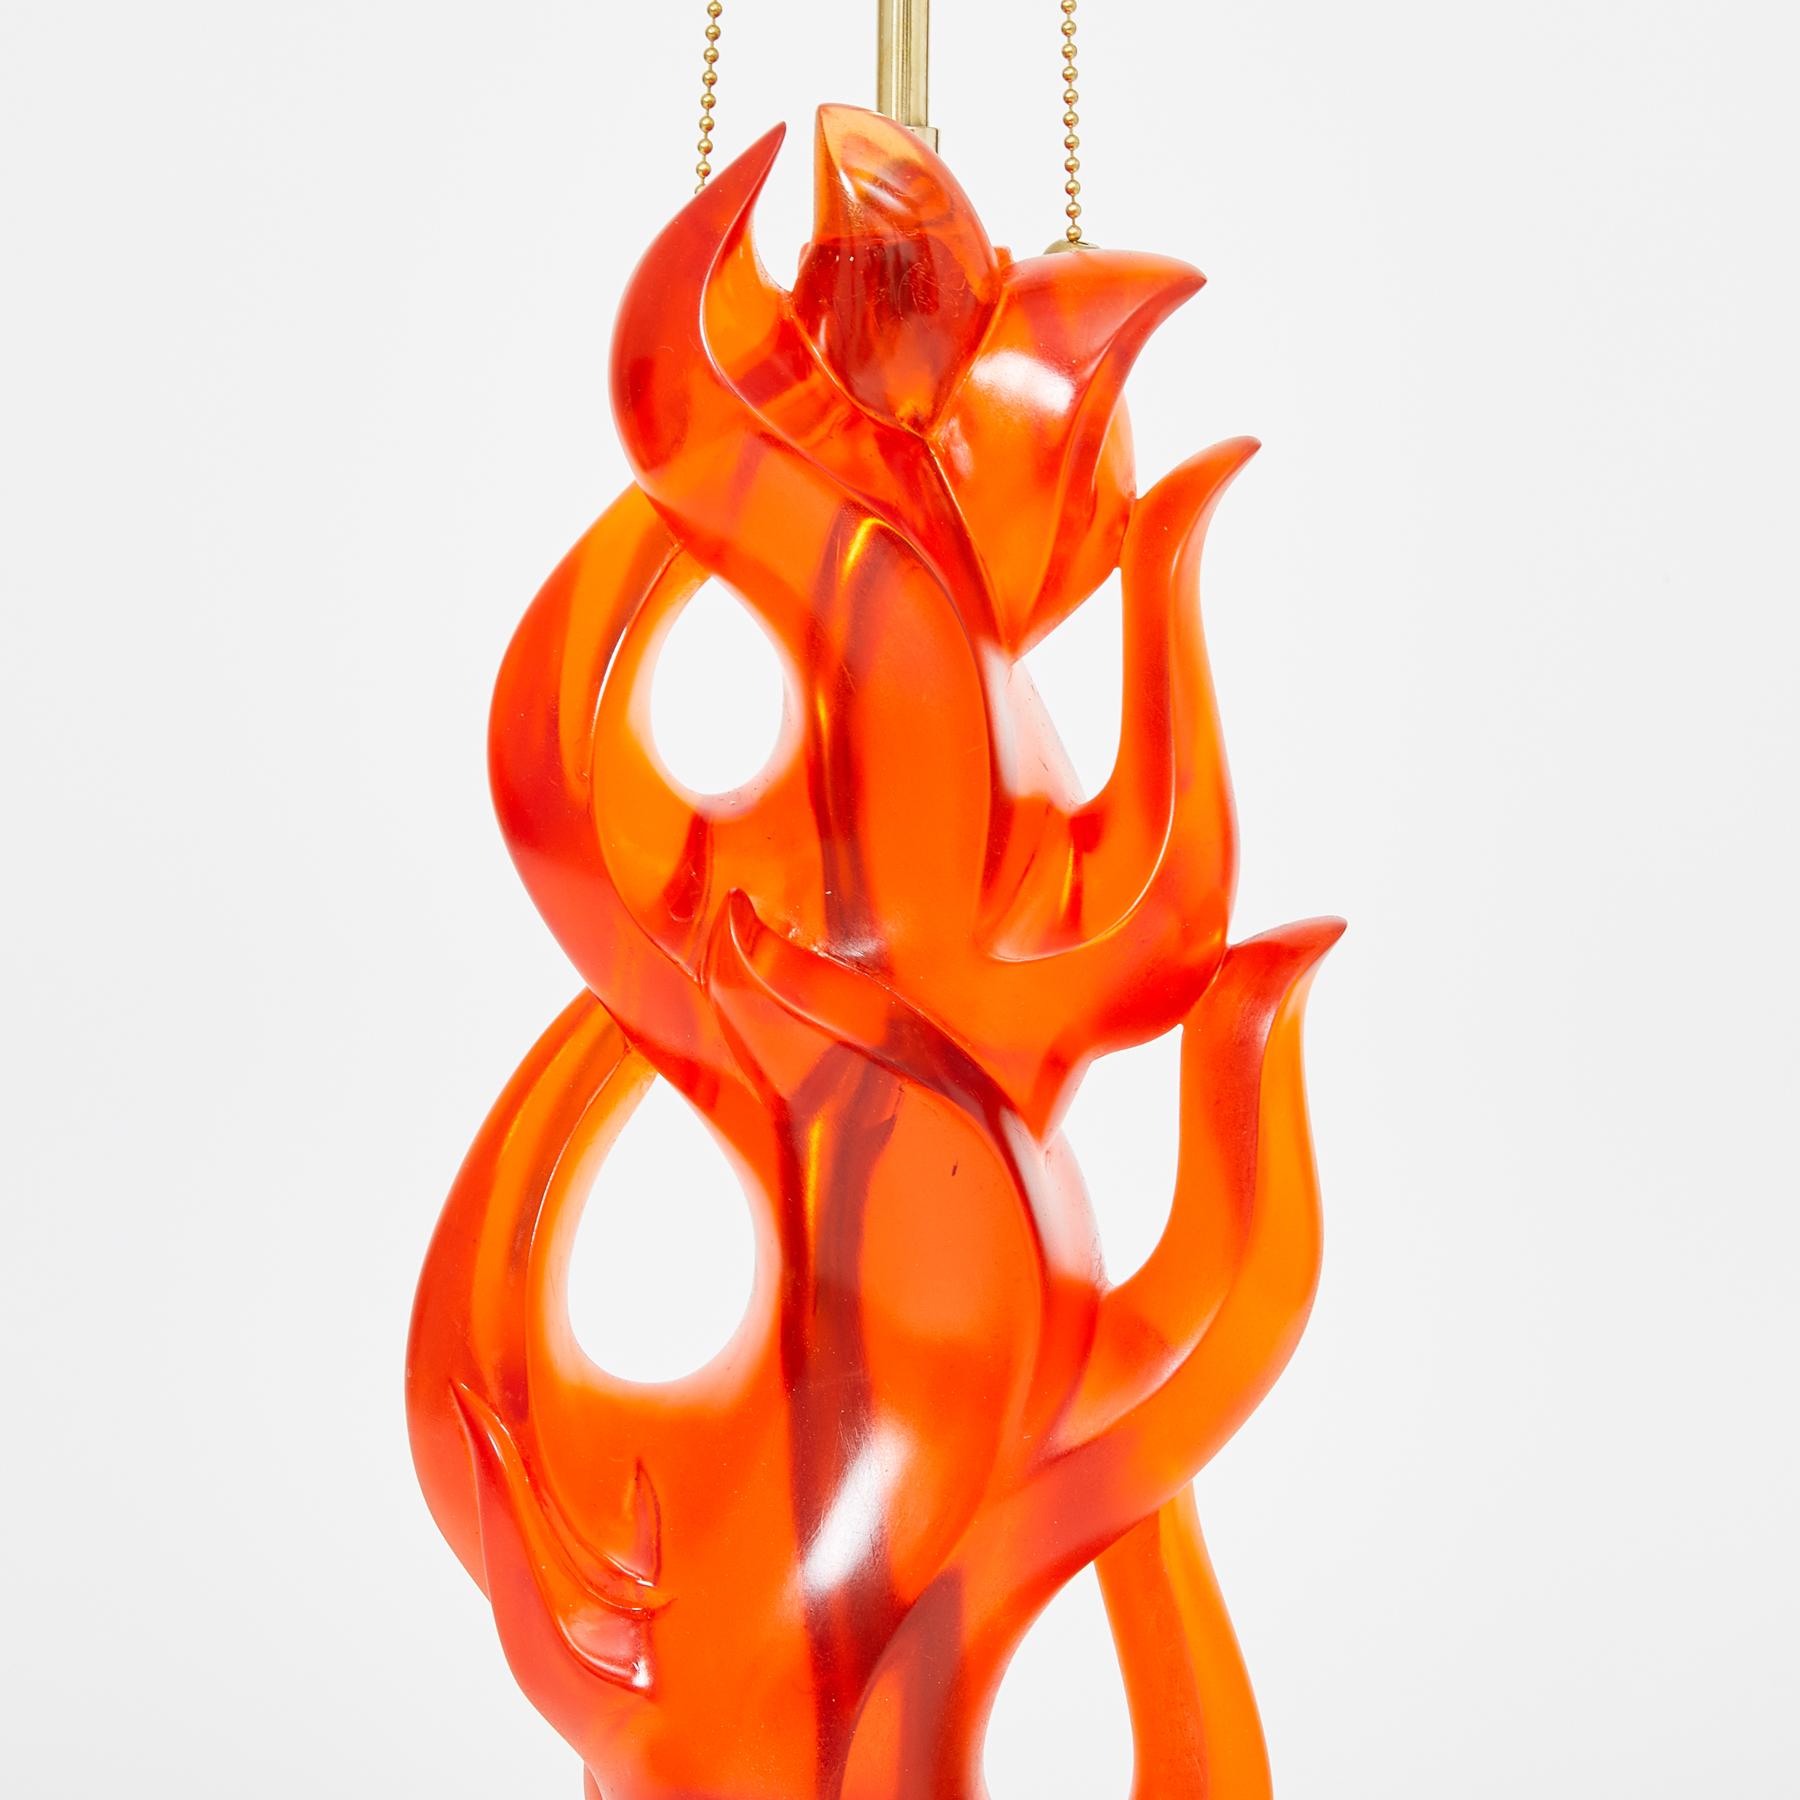 Modern Pair of Candela Lamps in Coral by David Duncan Studio For Sale